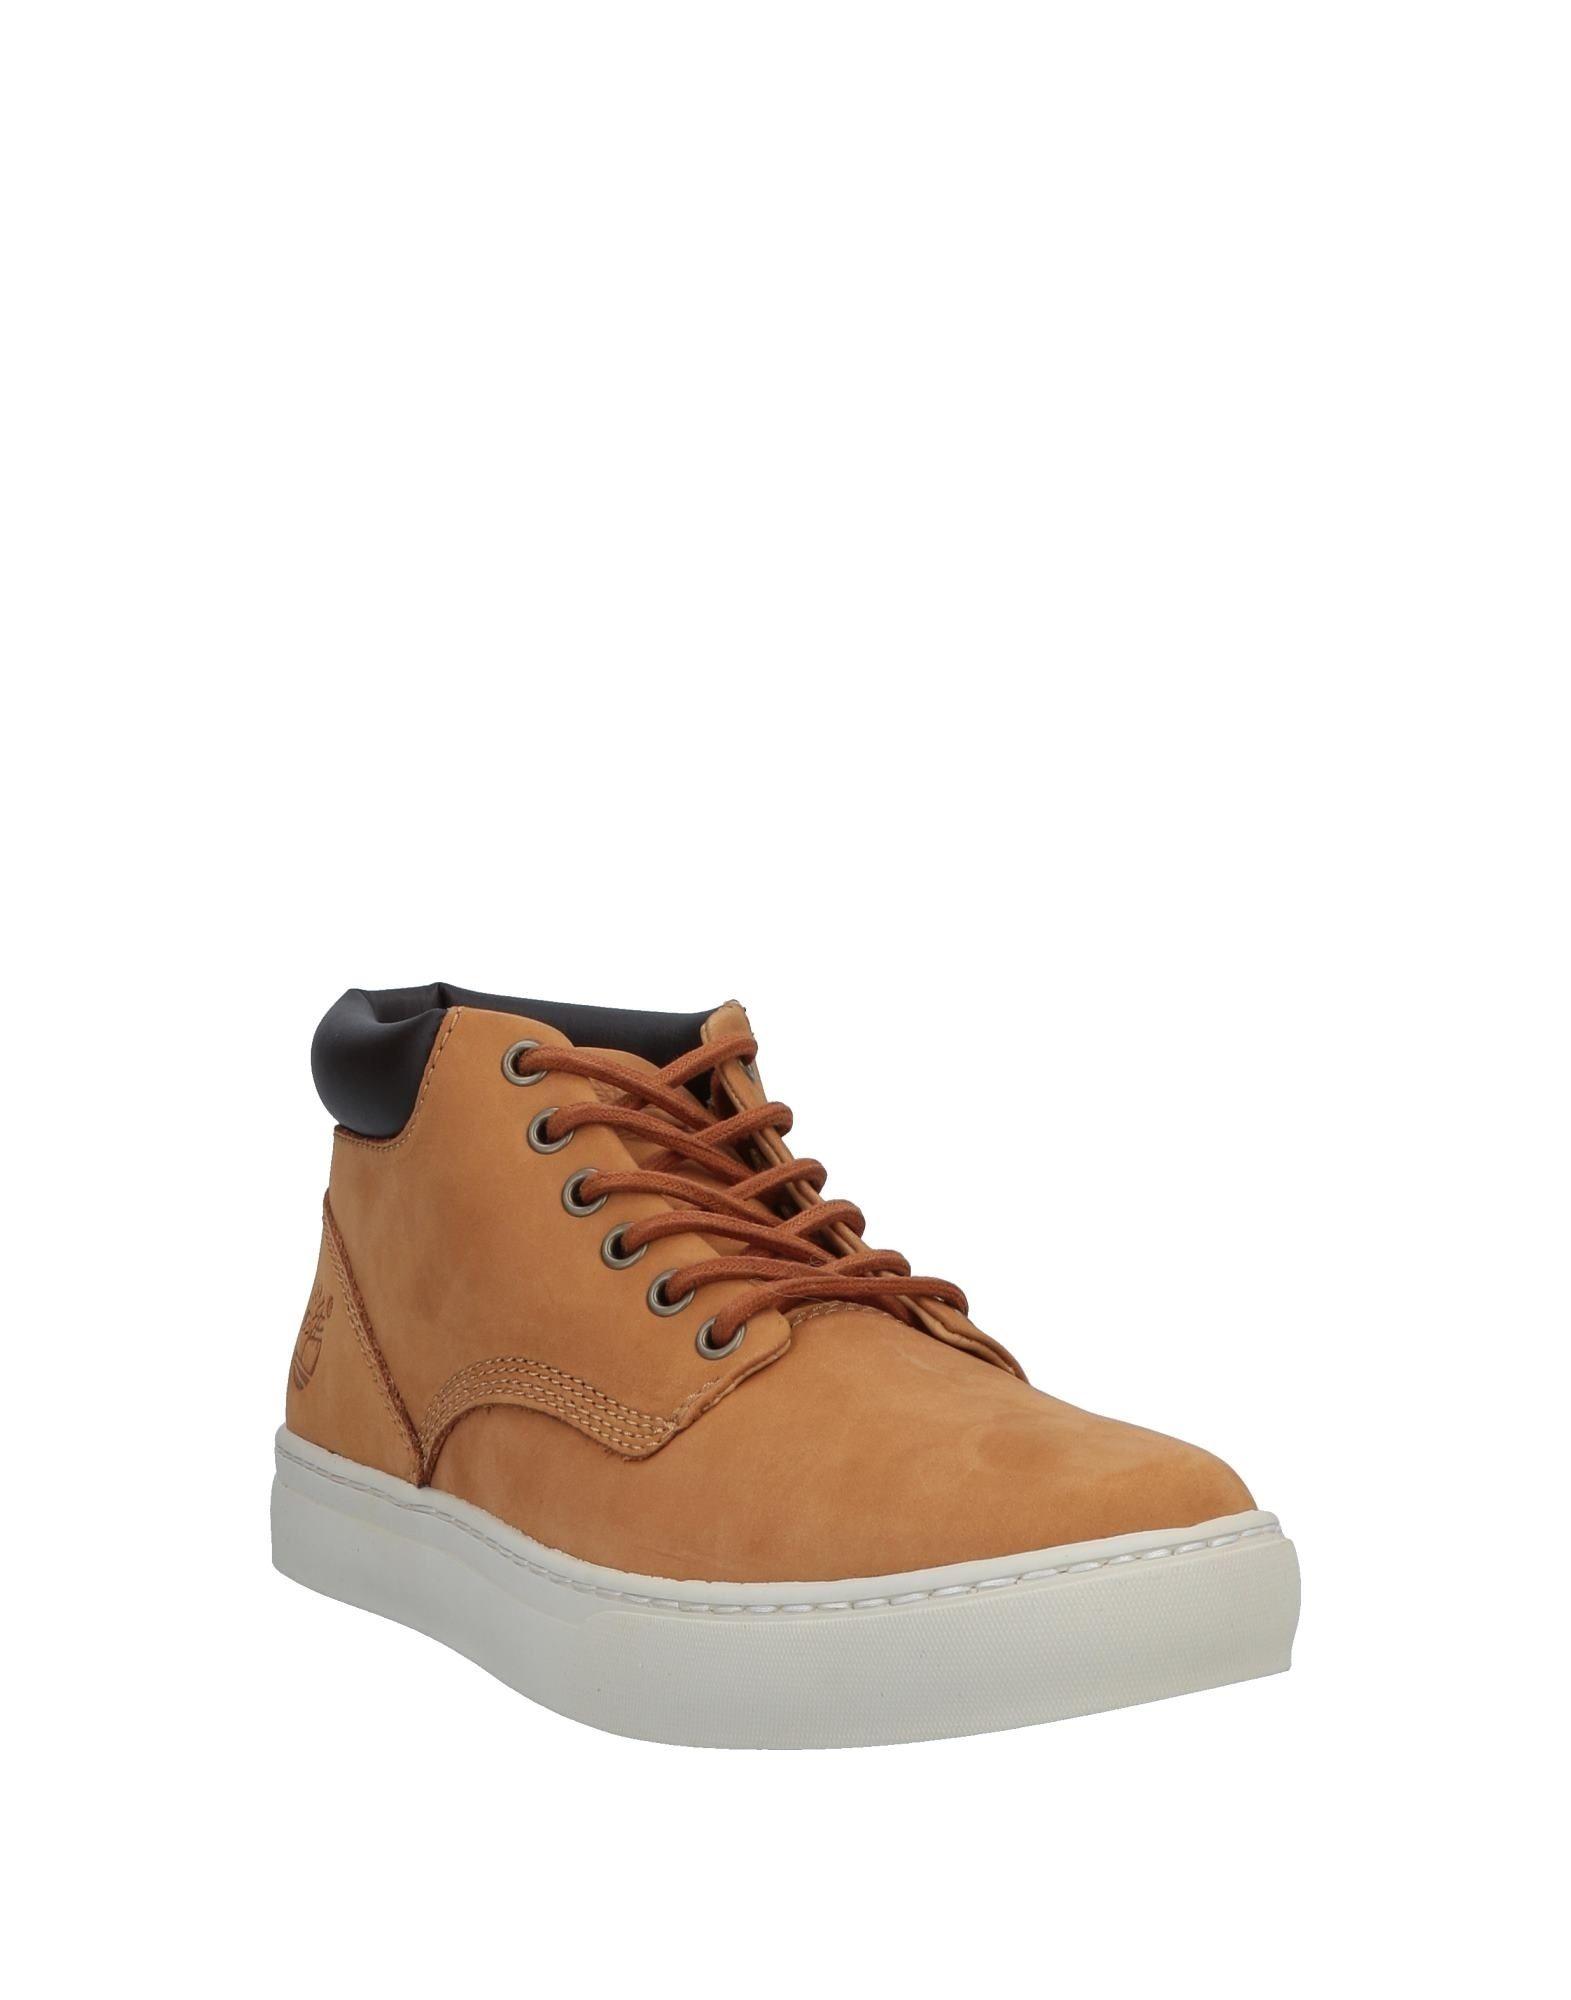 Timberland Leather High-tops & Sneakers in Camel (Brown) for Men - Lyst